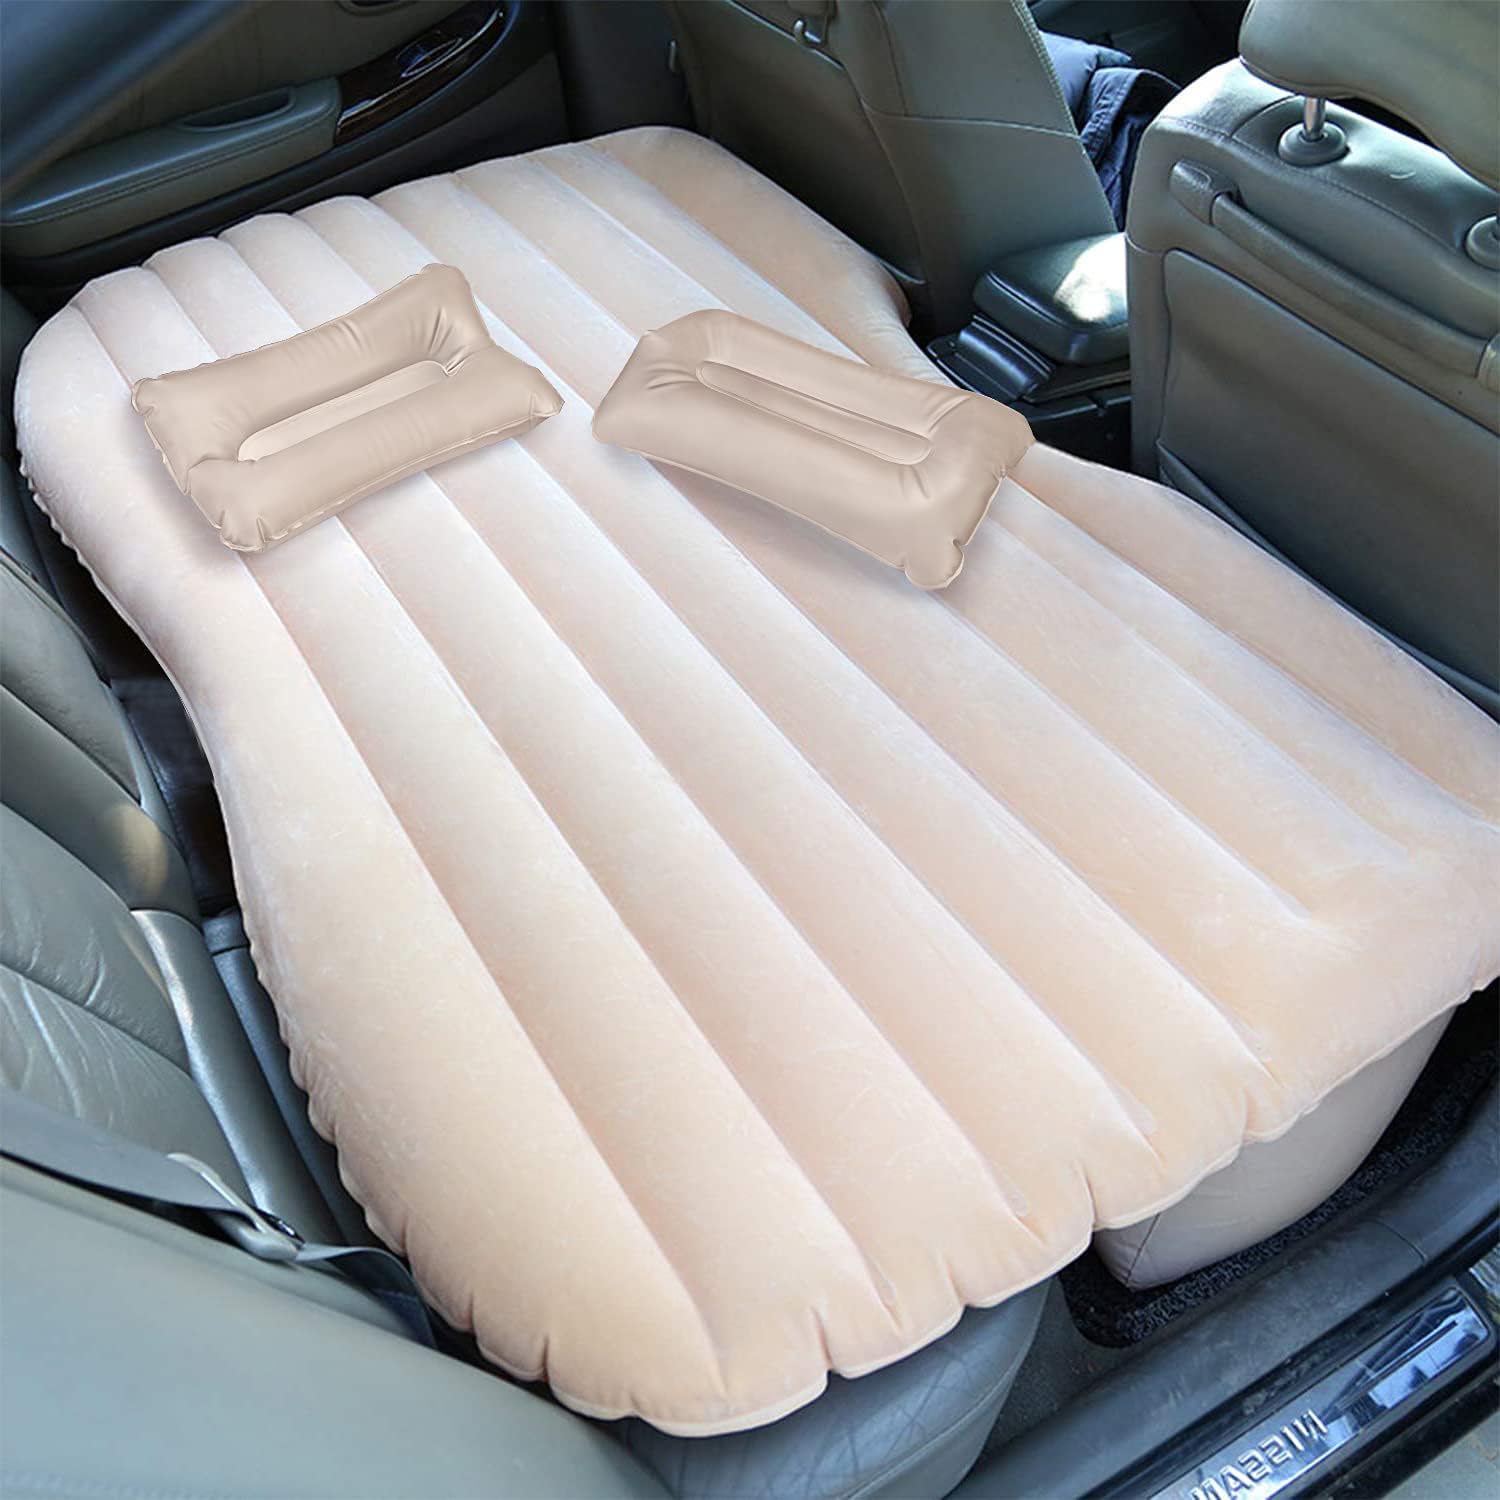 Automatic inflatable car mattress with 2 pillows